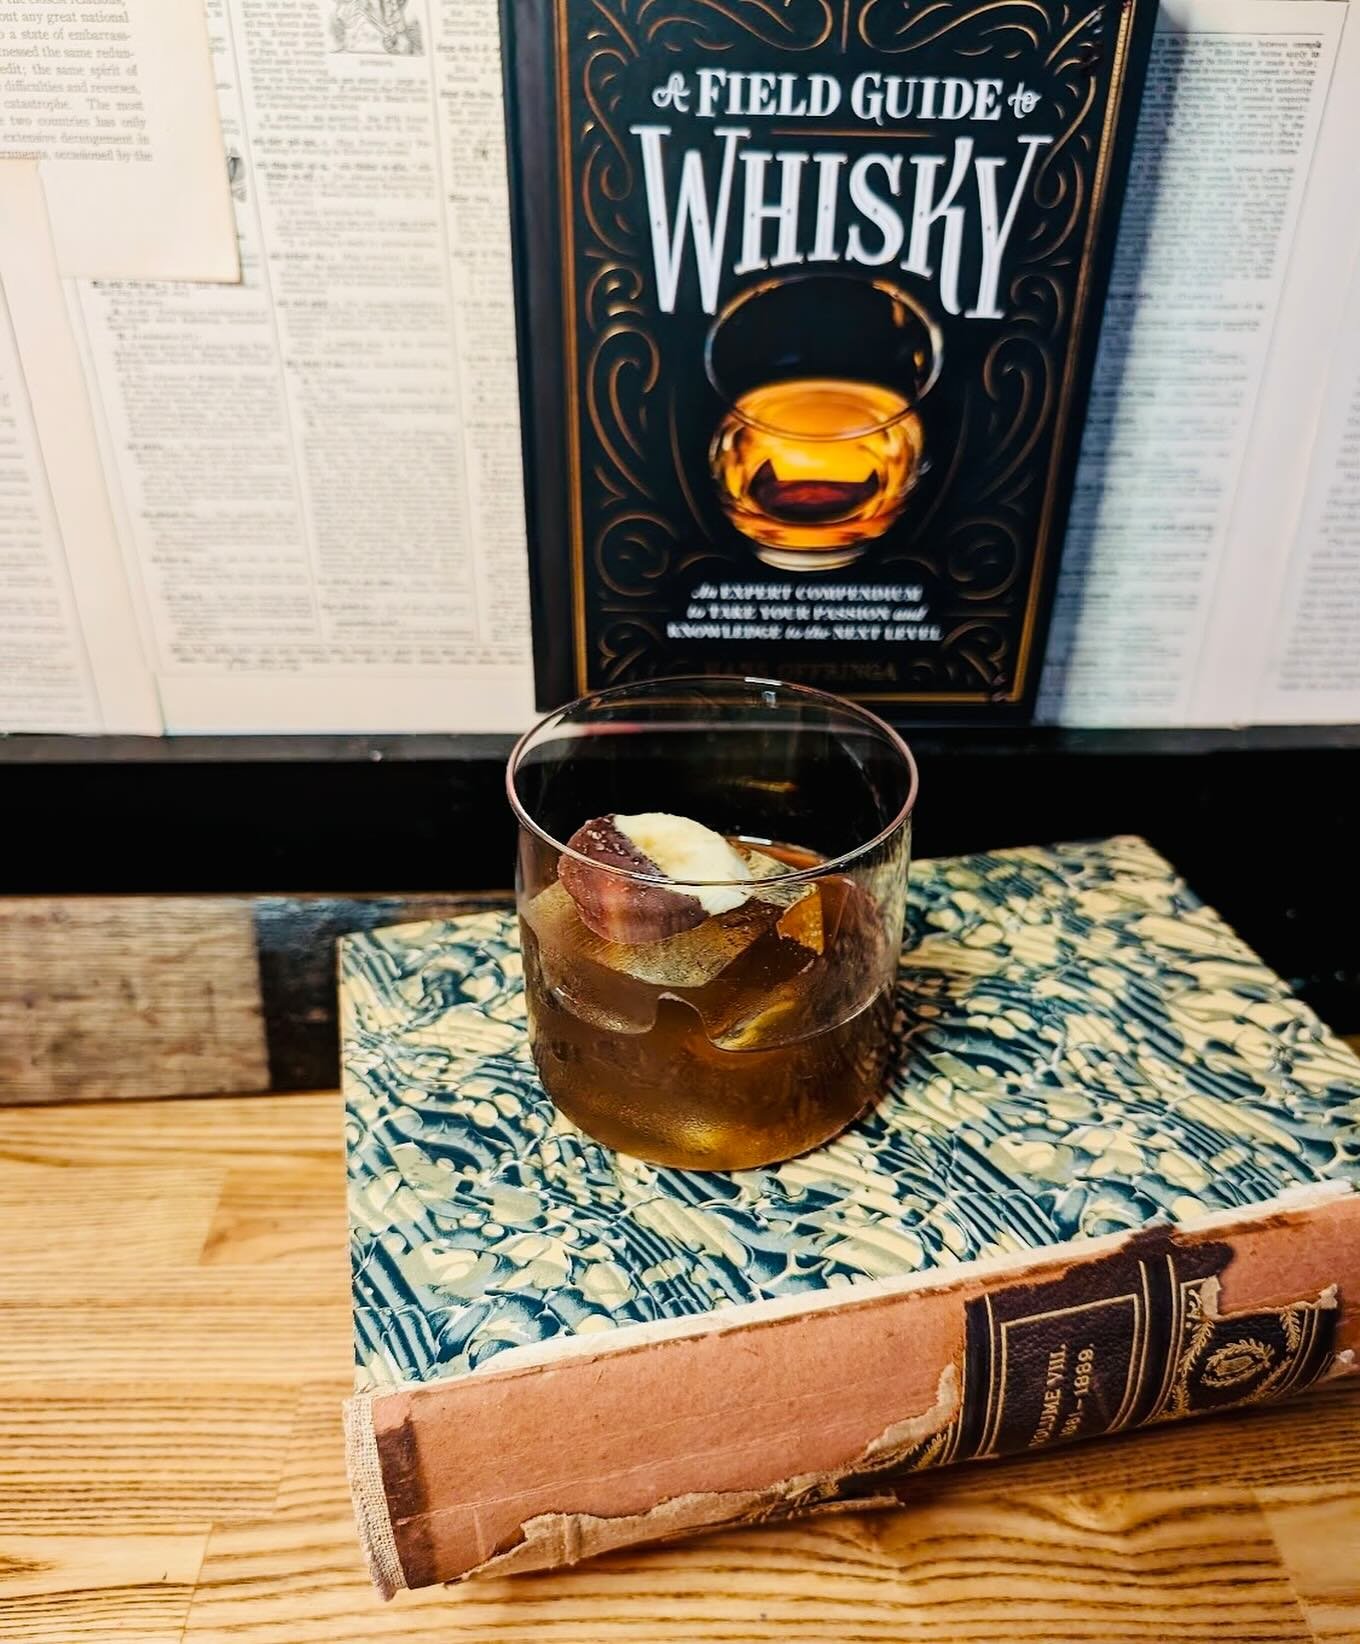 w&bull;h&bull;i&bull;s&bull;k&bull;e&bull;y  f&bull;u&bull;n  f&bull;a&bull;c&bull;t  f&bull;r&bull;i&bull;d&bull;a&bull;y

Did you know the term &ldquo;whiskey&rdquo; originates from the Gaelic phrase &ldquo;uisge beatha&rdquo; (pronounced &ldquo;is